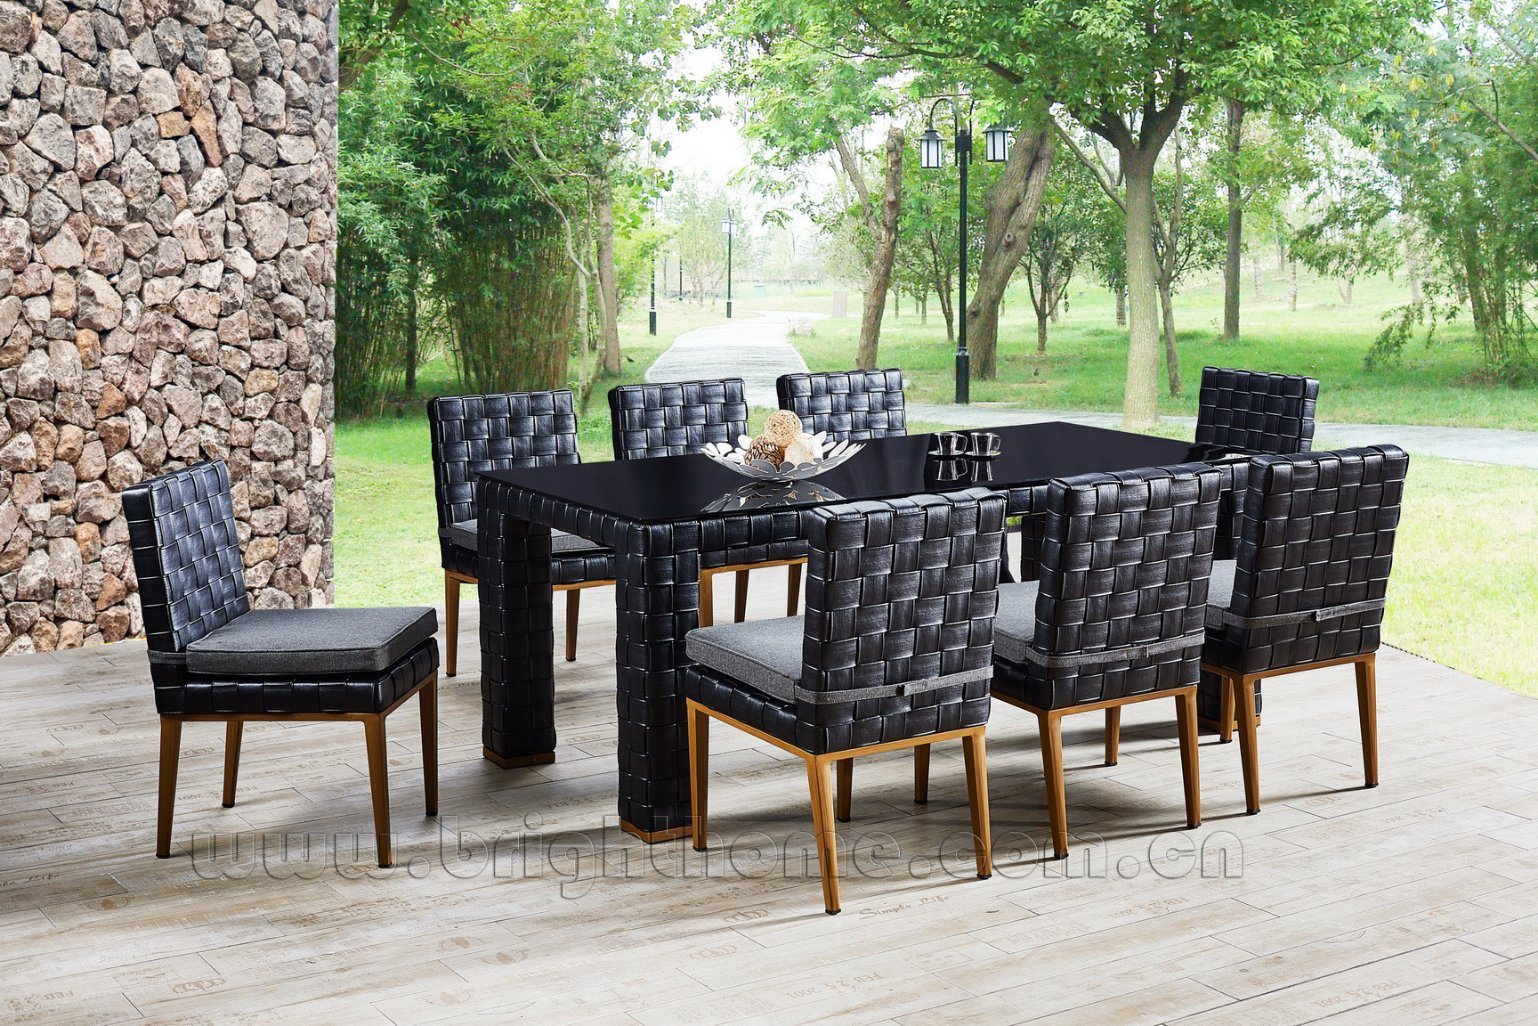 Outdoor Use Chair and Table Furniture